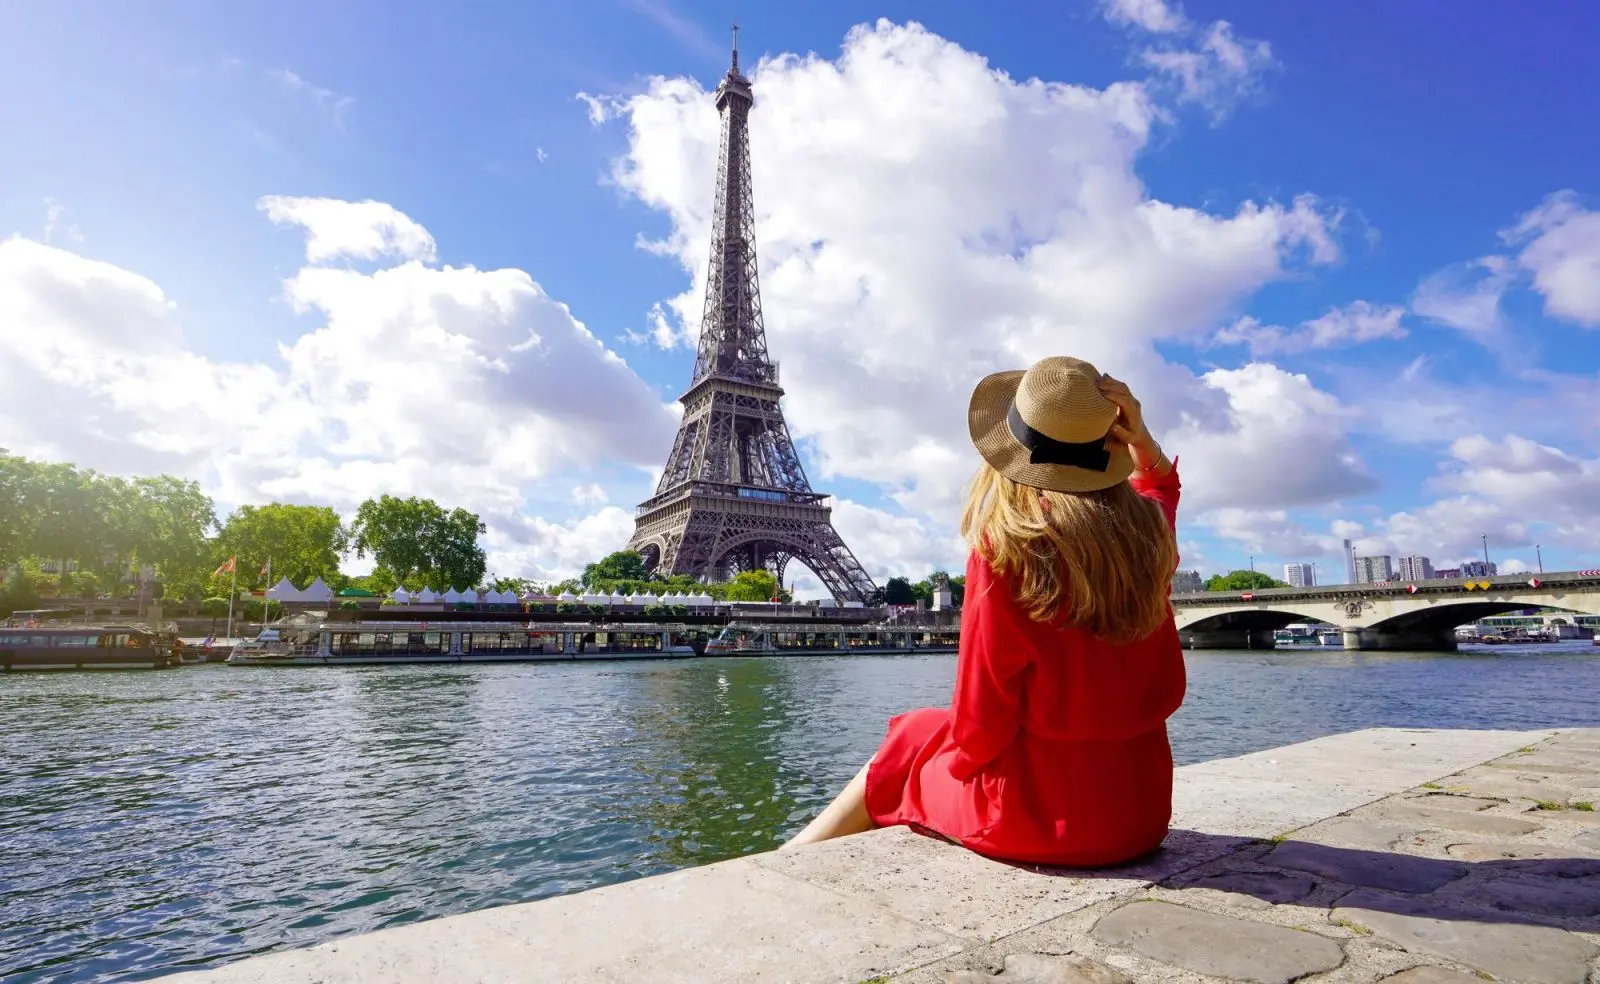 woman tourist watching Eiffel Tower in Paris on the banks of Seine River